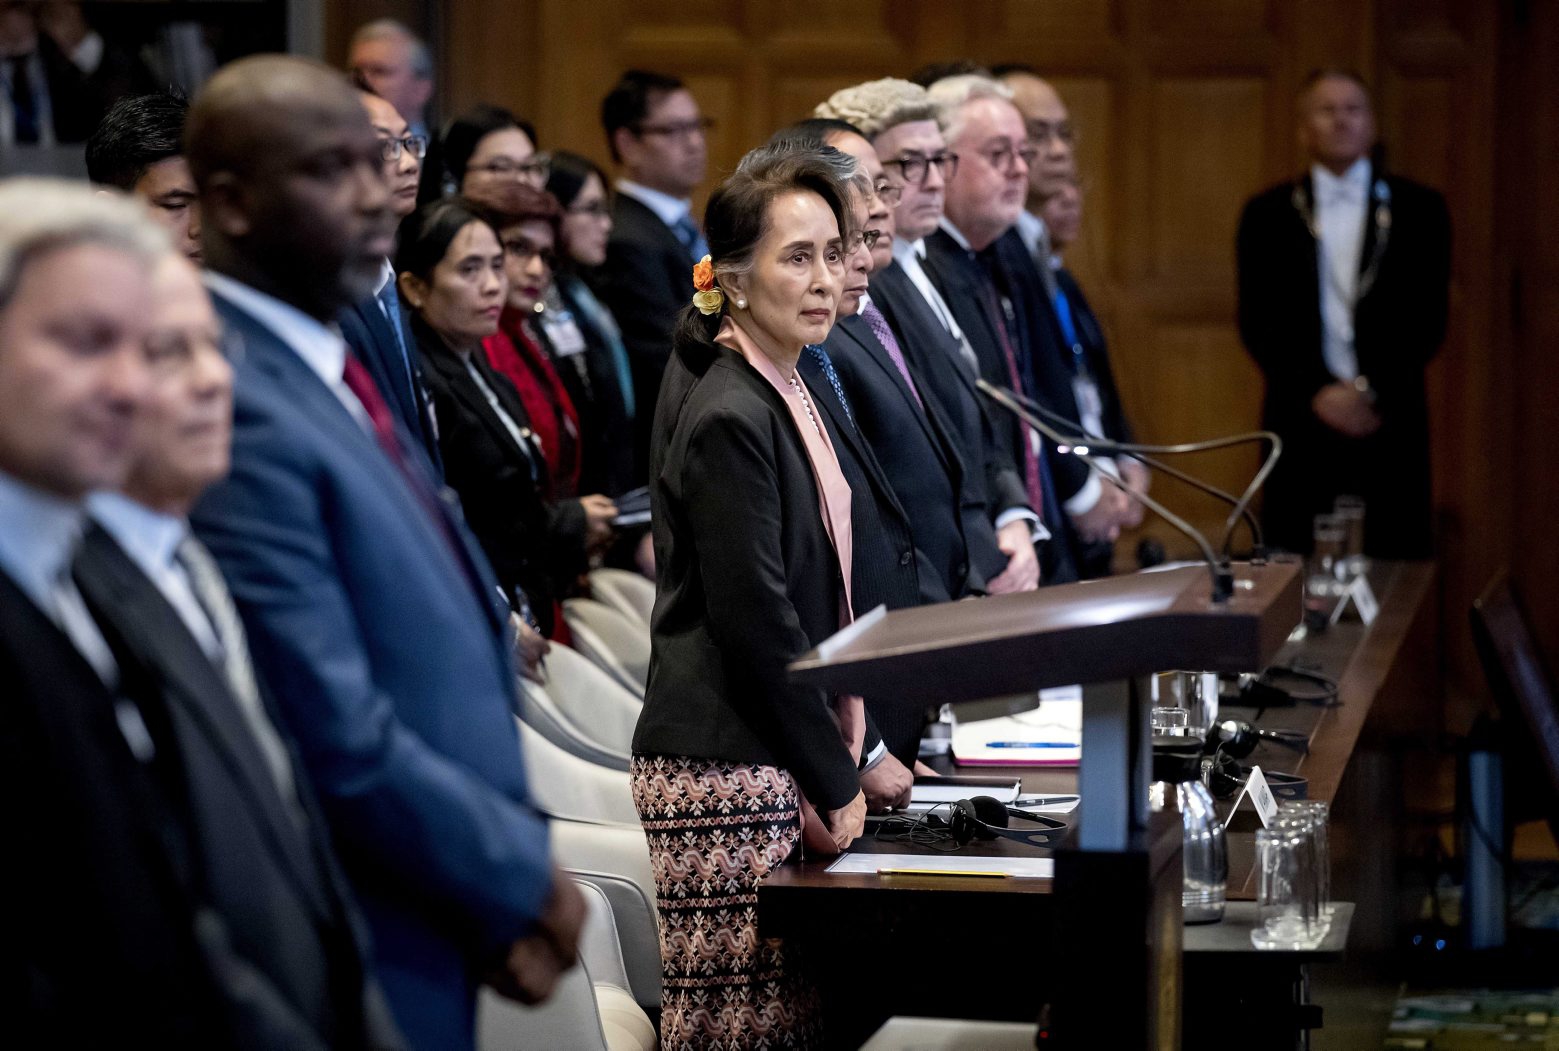 epaselect epa08059167 Myanmar State Counselor Aung San Suu Kyi (C) appears before the International Court of Justice (ICJ) as Abubacarr Tambadou (3-L), minister of justice of The Gambia, looks on, at the Peace Palace in The Hague, Netherlands, 10 December 2019. Suu Kyi will defend her country against accusations of genocide filed by The Gambia, following the 2017 Myanmar military crackdown on the Rohingya Muslim minority.  EPA/KOEN VAN WEEL epaselect NETHERLANDS MYANMAR TRIAL